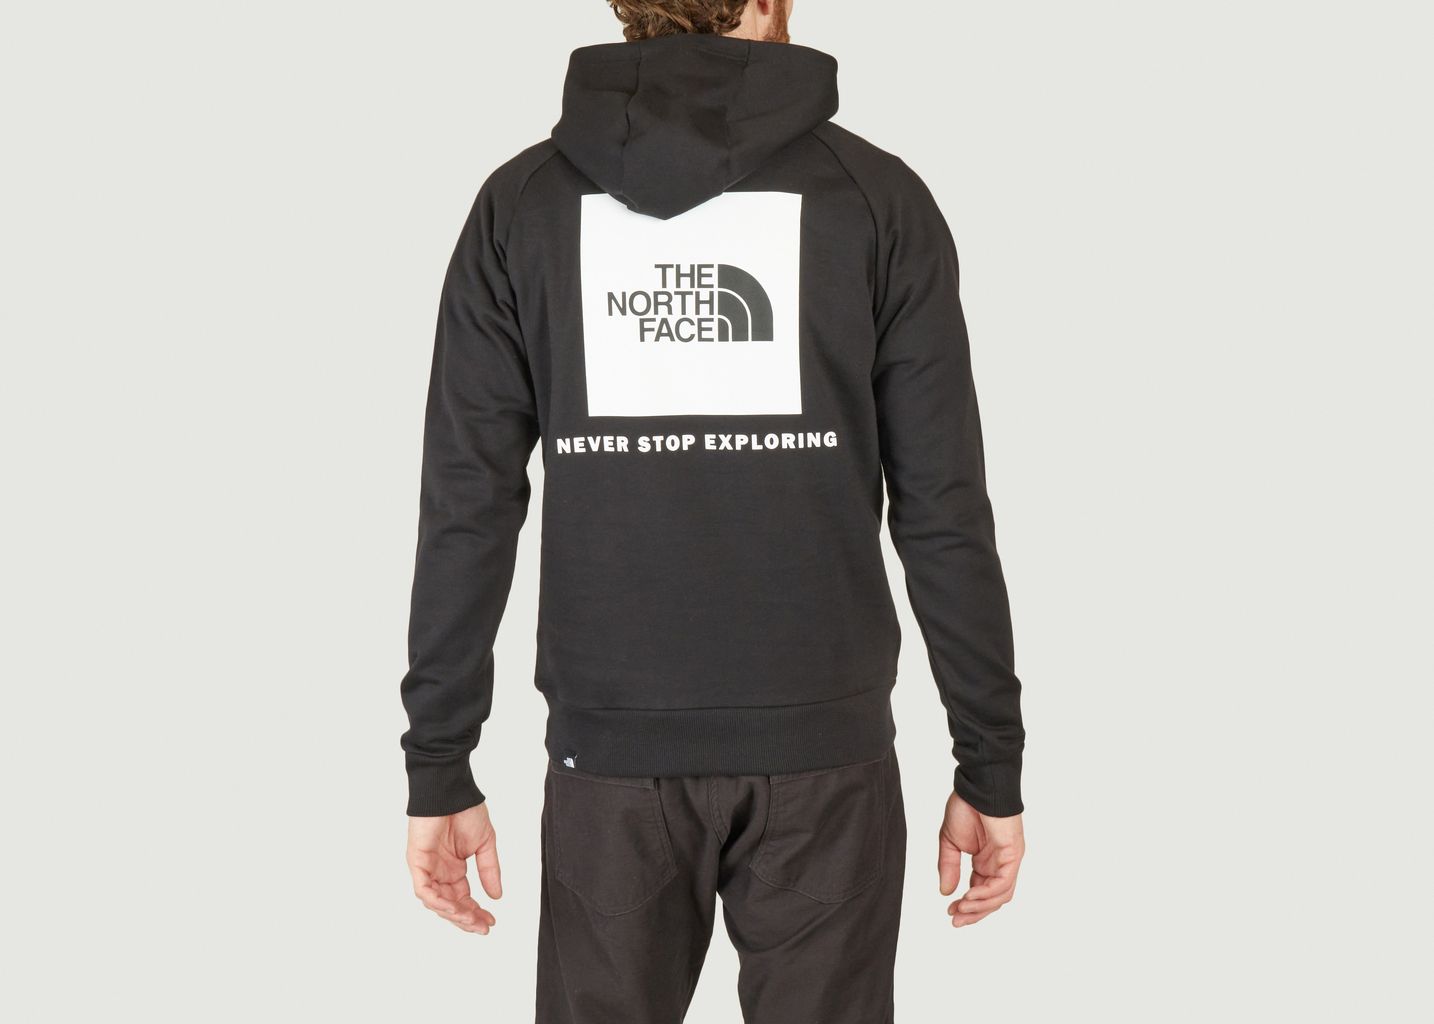 Redbox Hoodie - The North Face